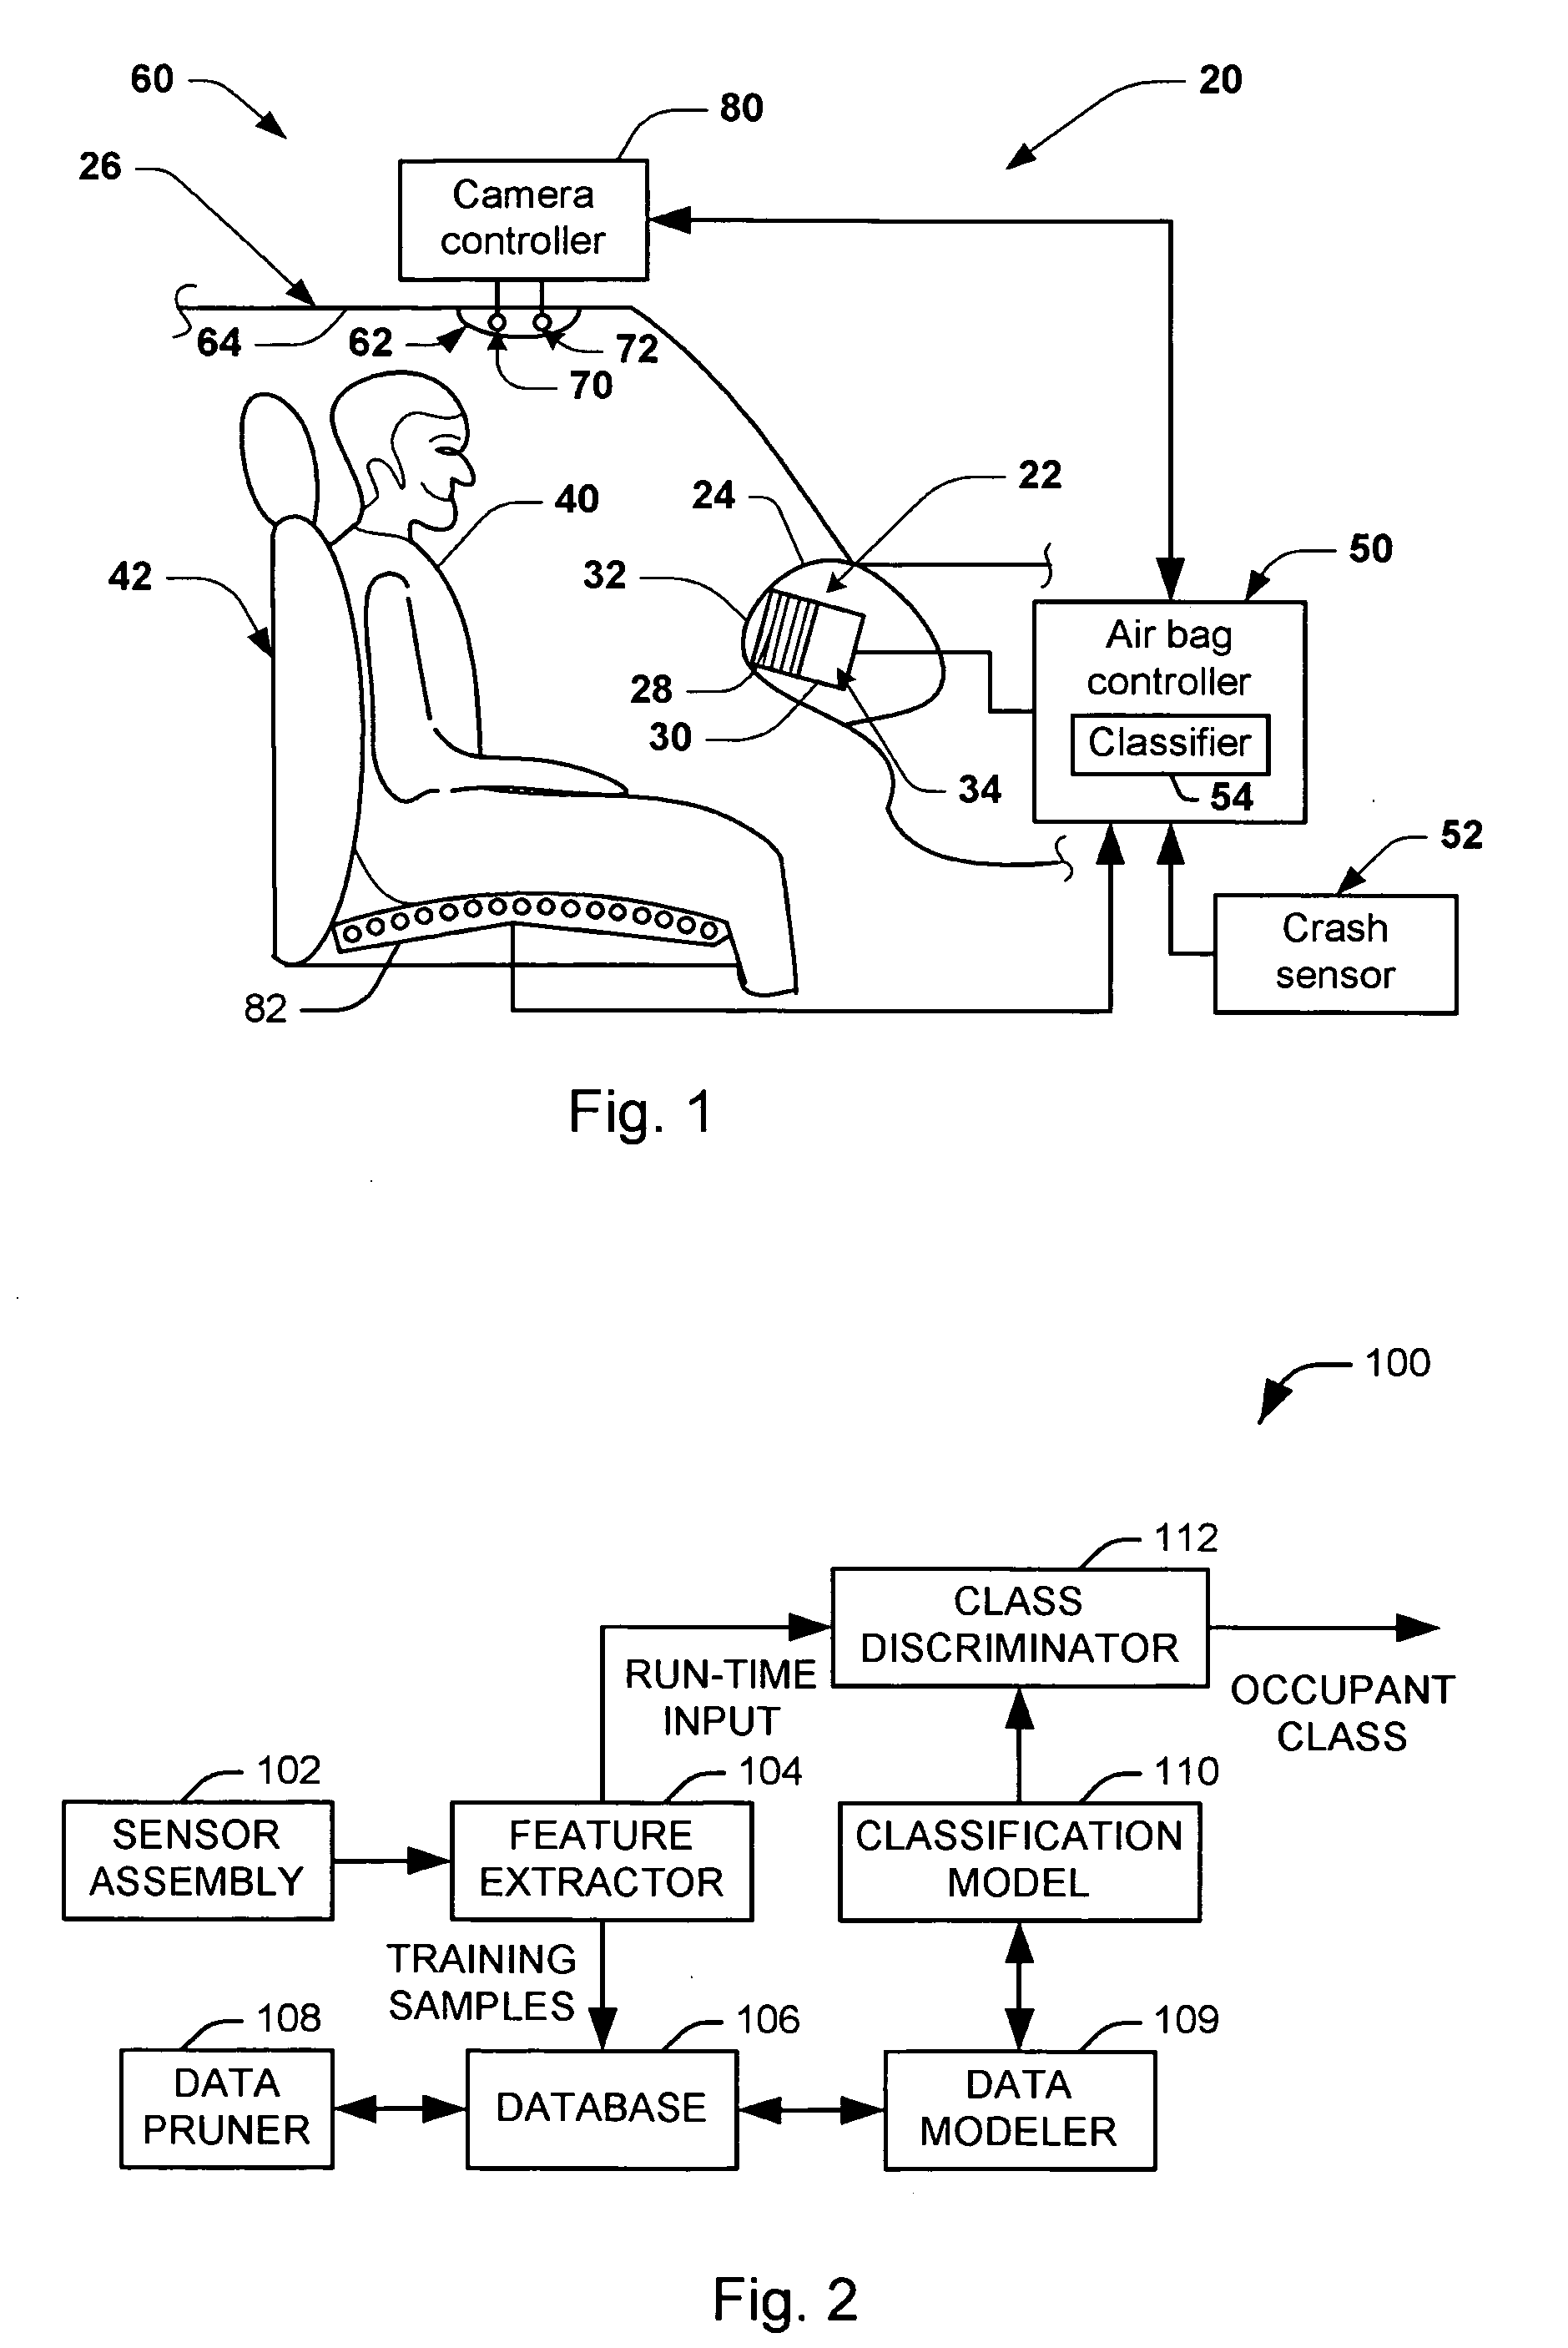 Method and apparatus for classifying a vehicle occupant via a non-parametric learning algorithm